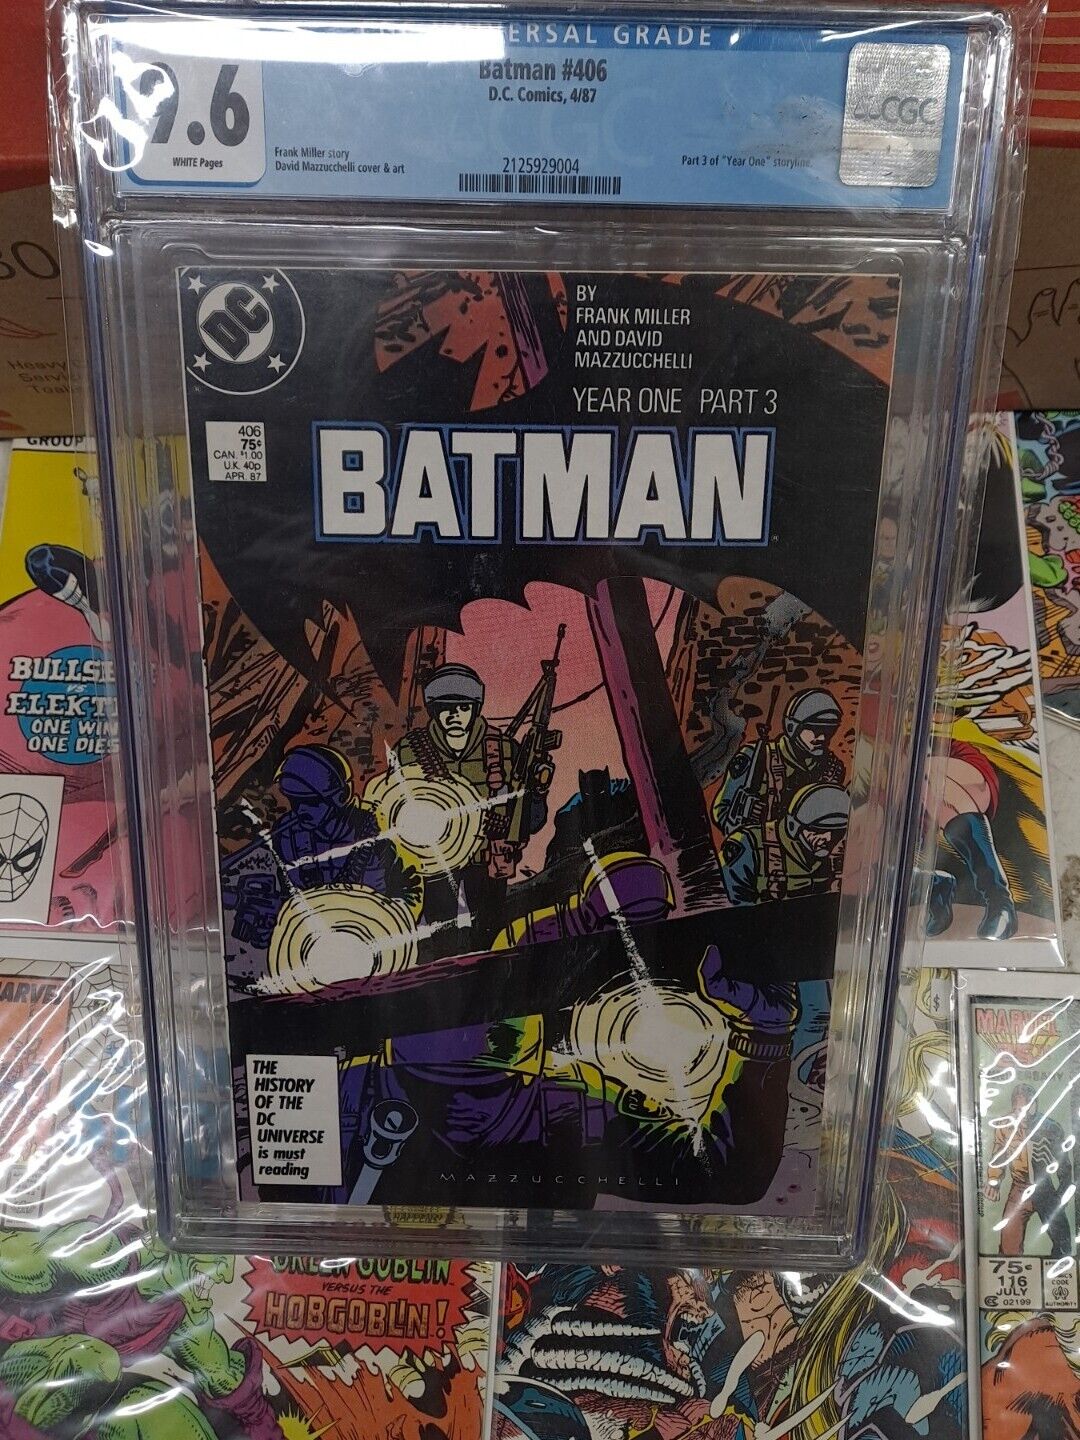 BATMAN #406 (DC, 1987) CGC Graded 9.6 ~ FRANK MILLER ~ YEAR ONE ~ White Pages